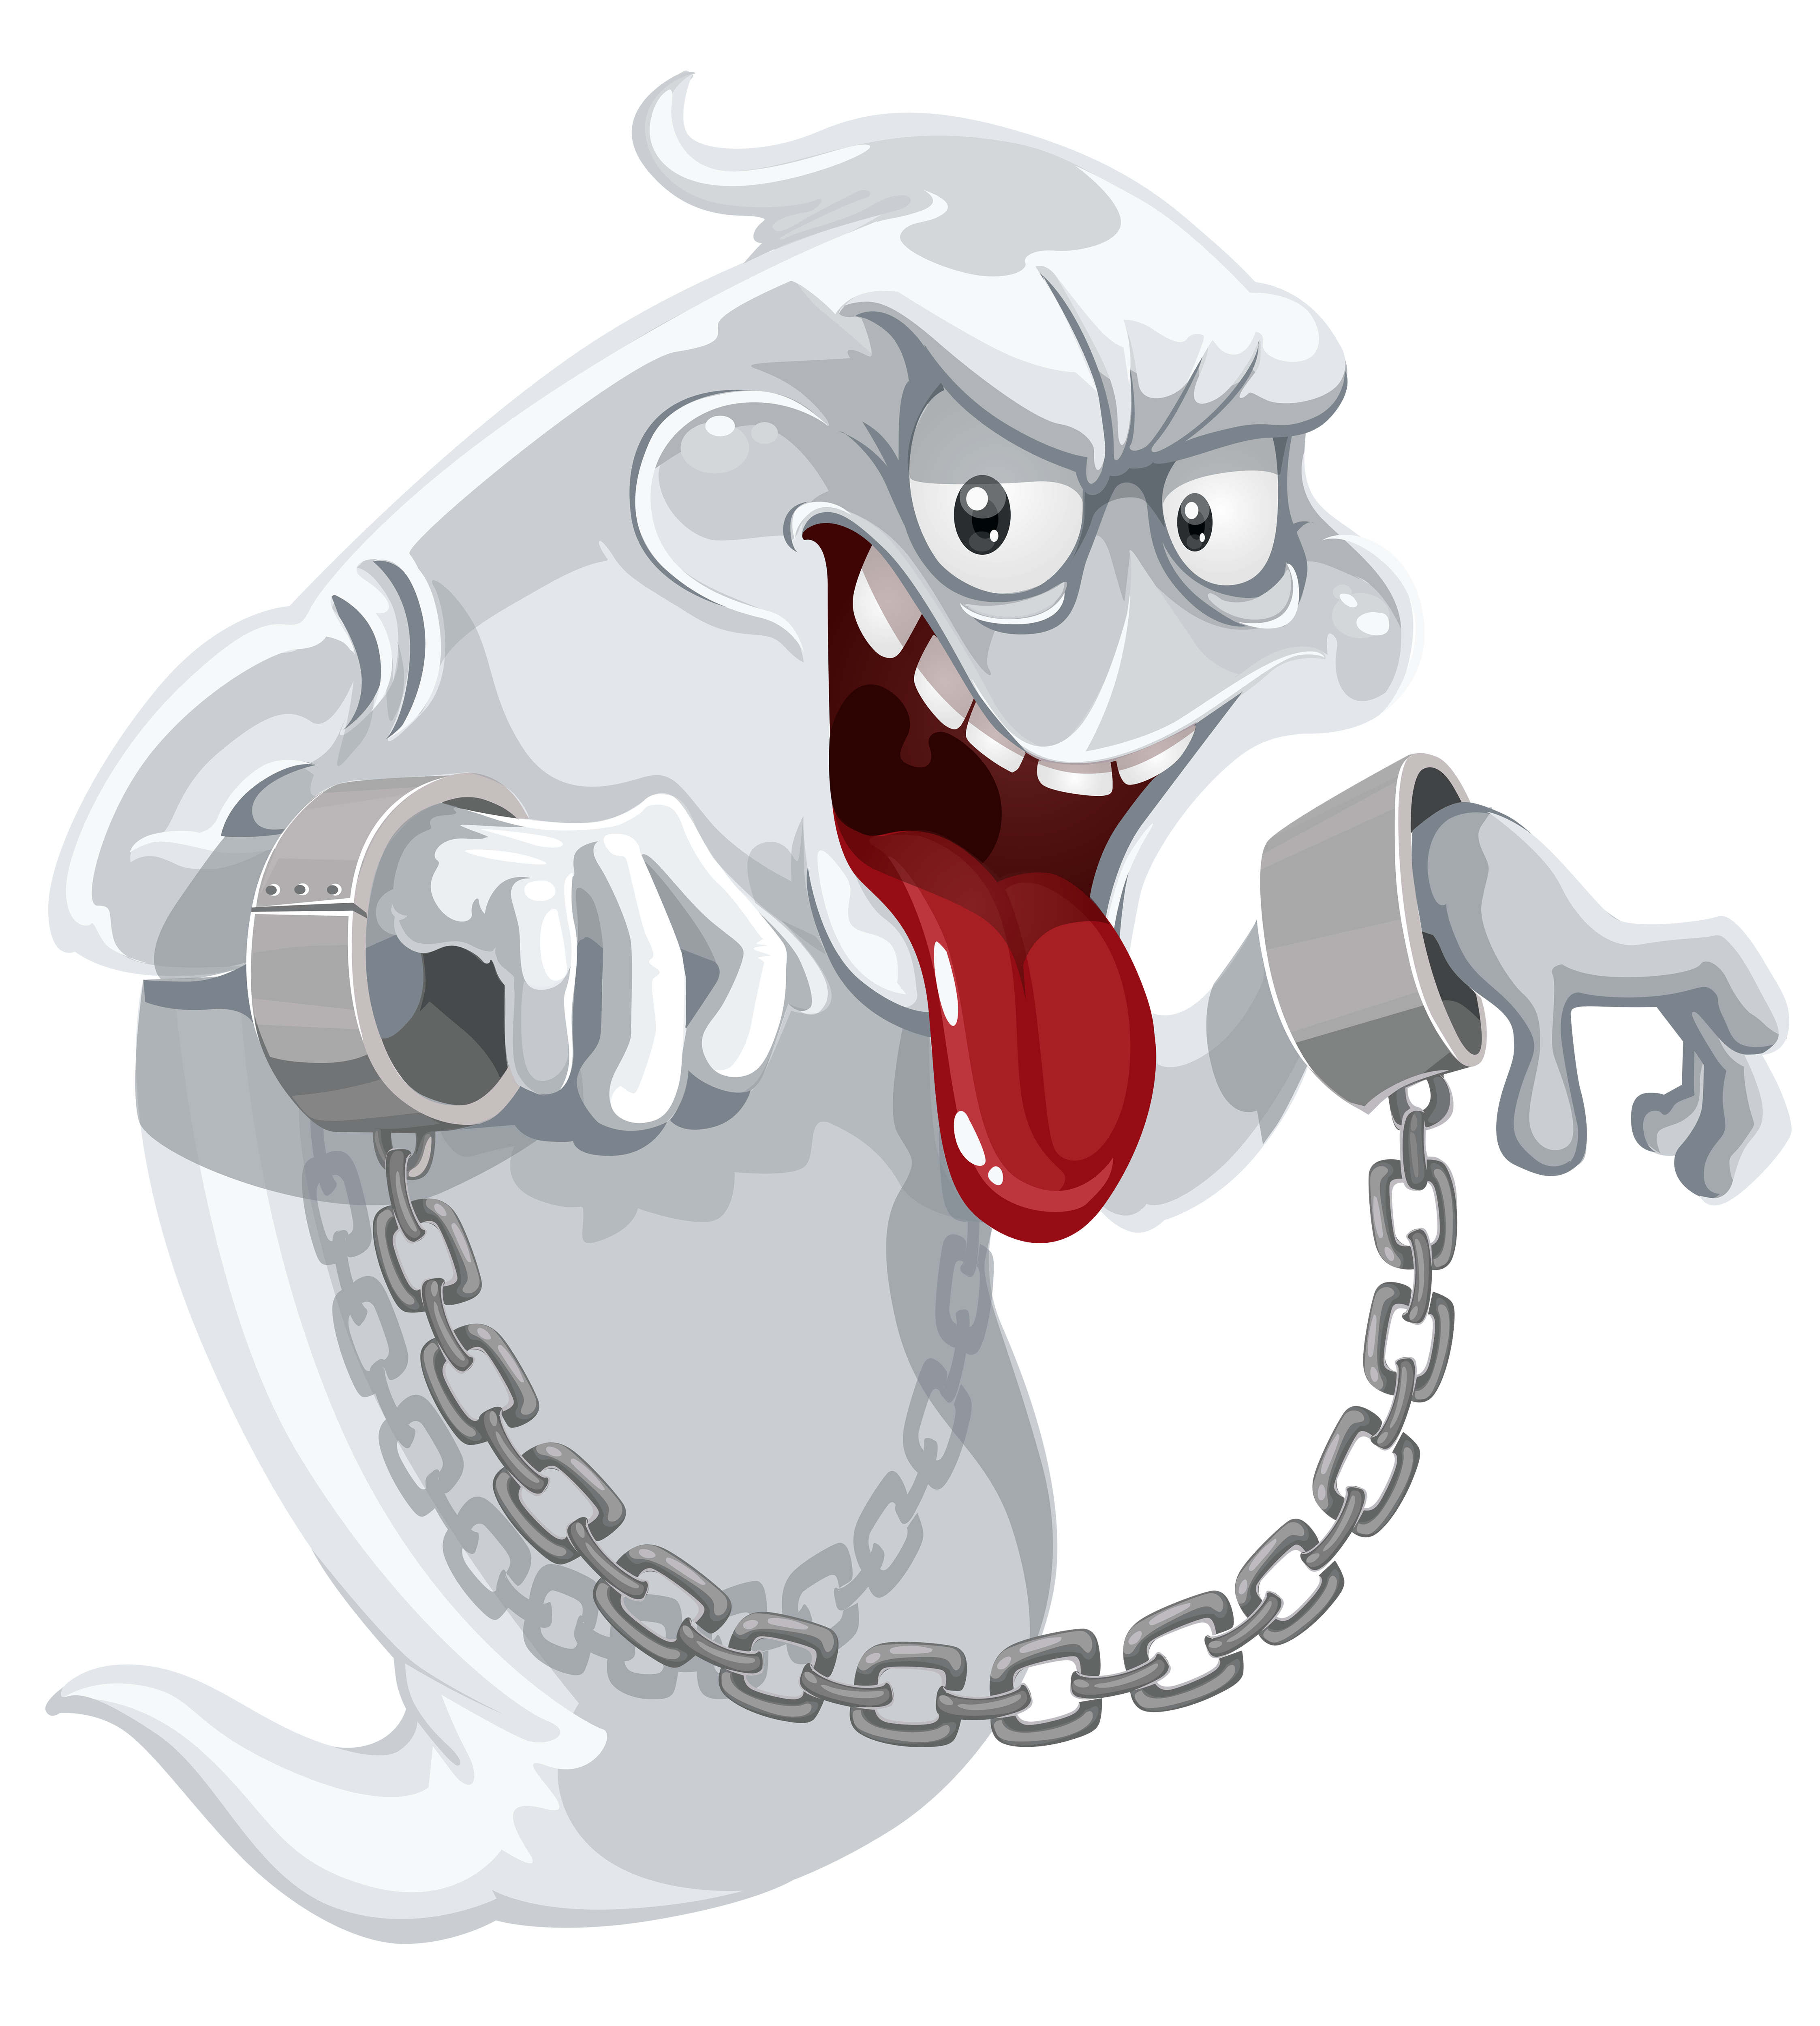 Grim reaper clipart thanksgiving. Evil ghost with chains